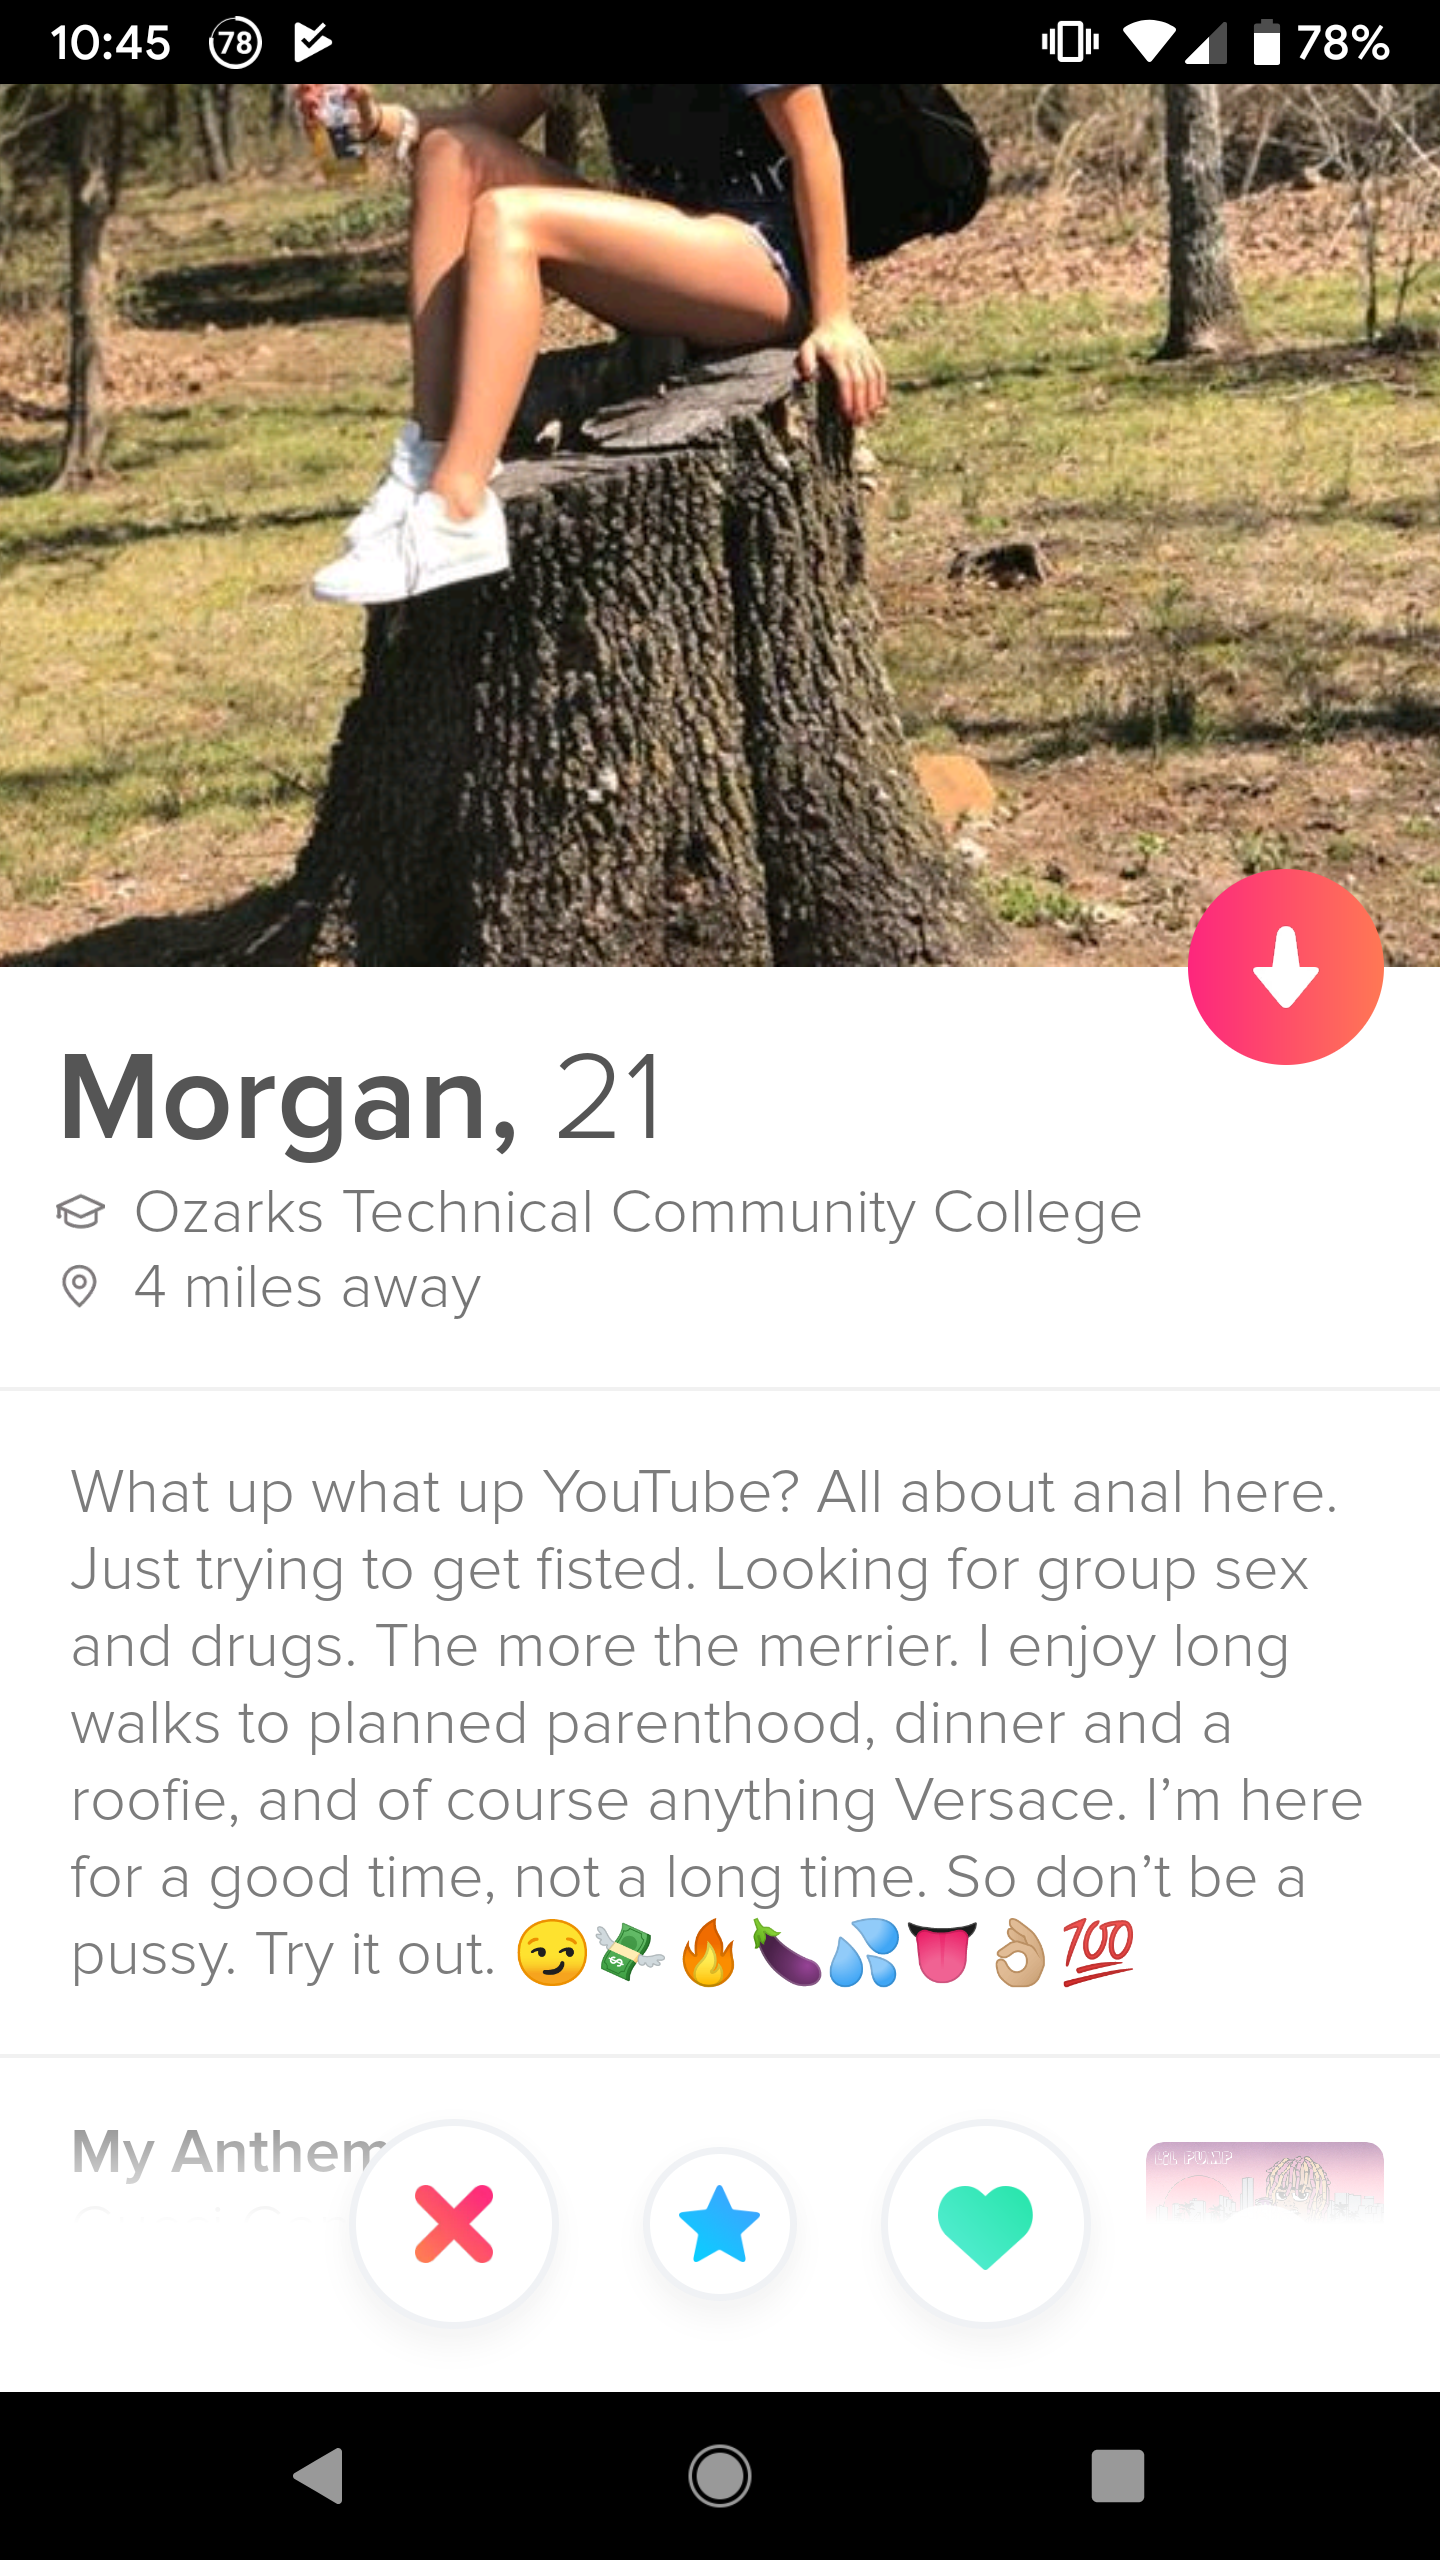 shameless tinder - Morgan, What up what up YouTube? All about anal here. Just trying to get fisted. Looking for group sex and drugs. The more the merrier. I enjoy long walks to planned parenthood, dinner